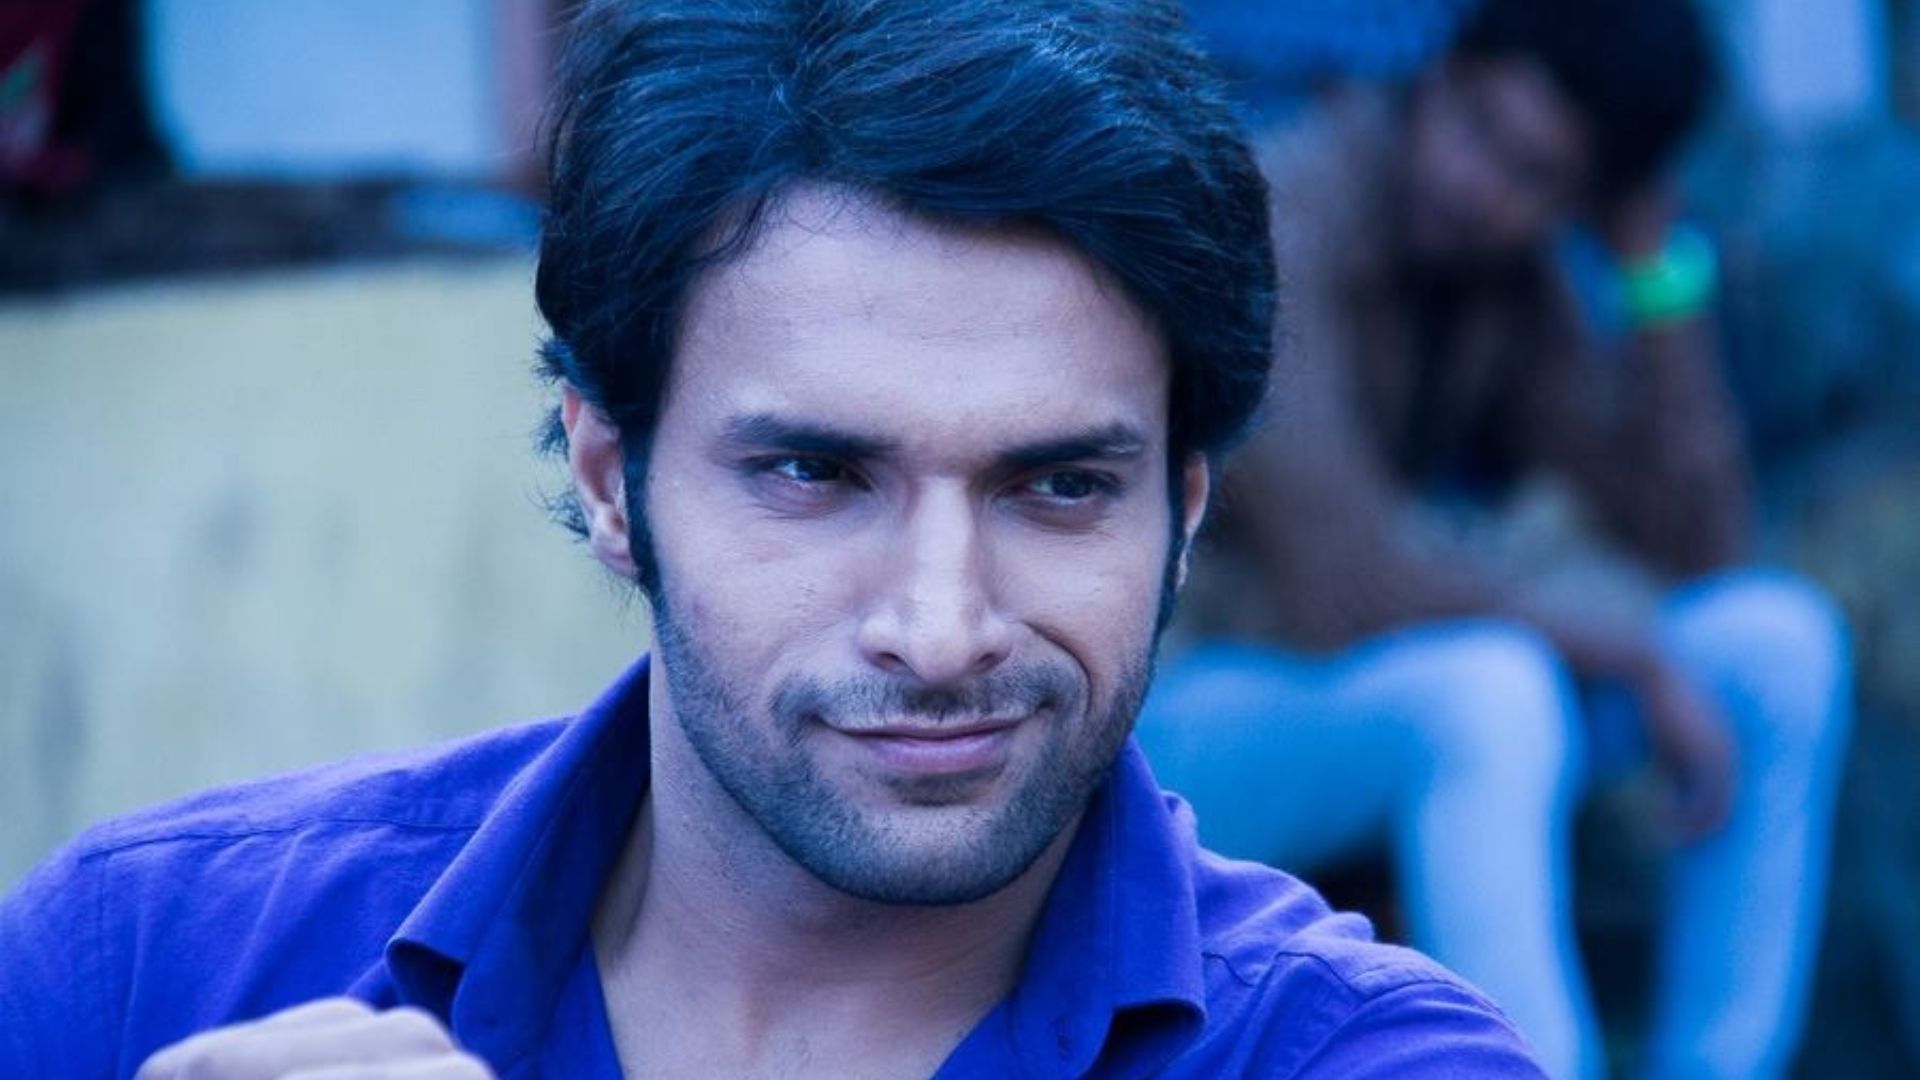 Shaleen Malhotra Net Worth - Known For Being A Video Jockey And Television Actor